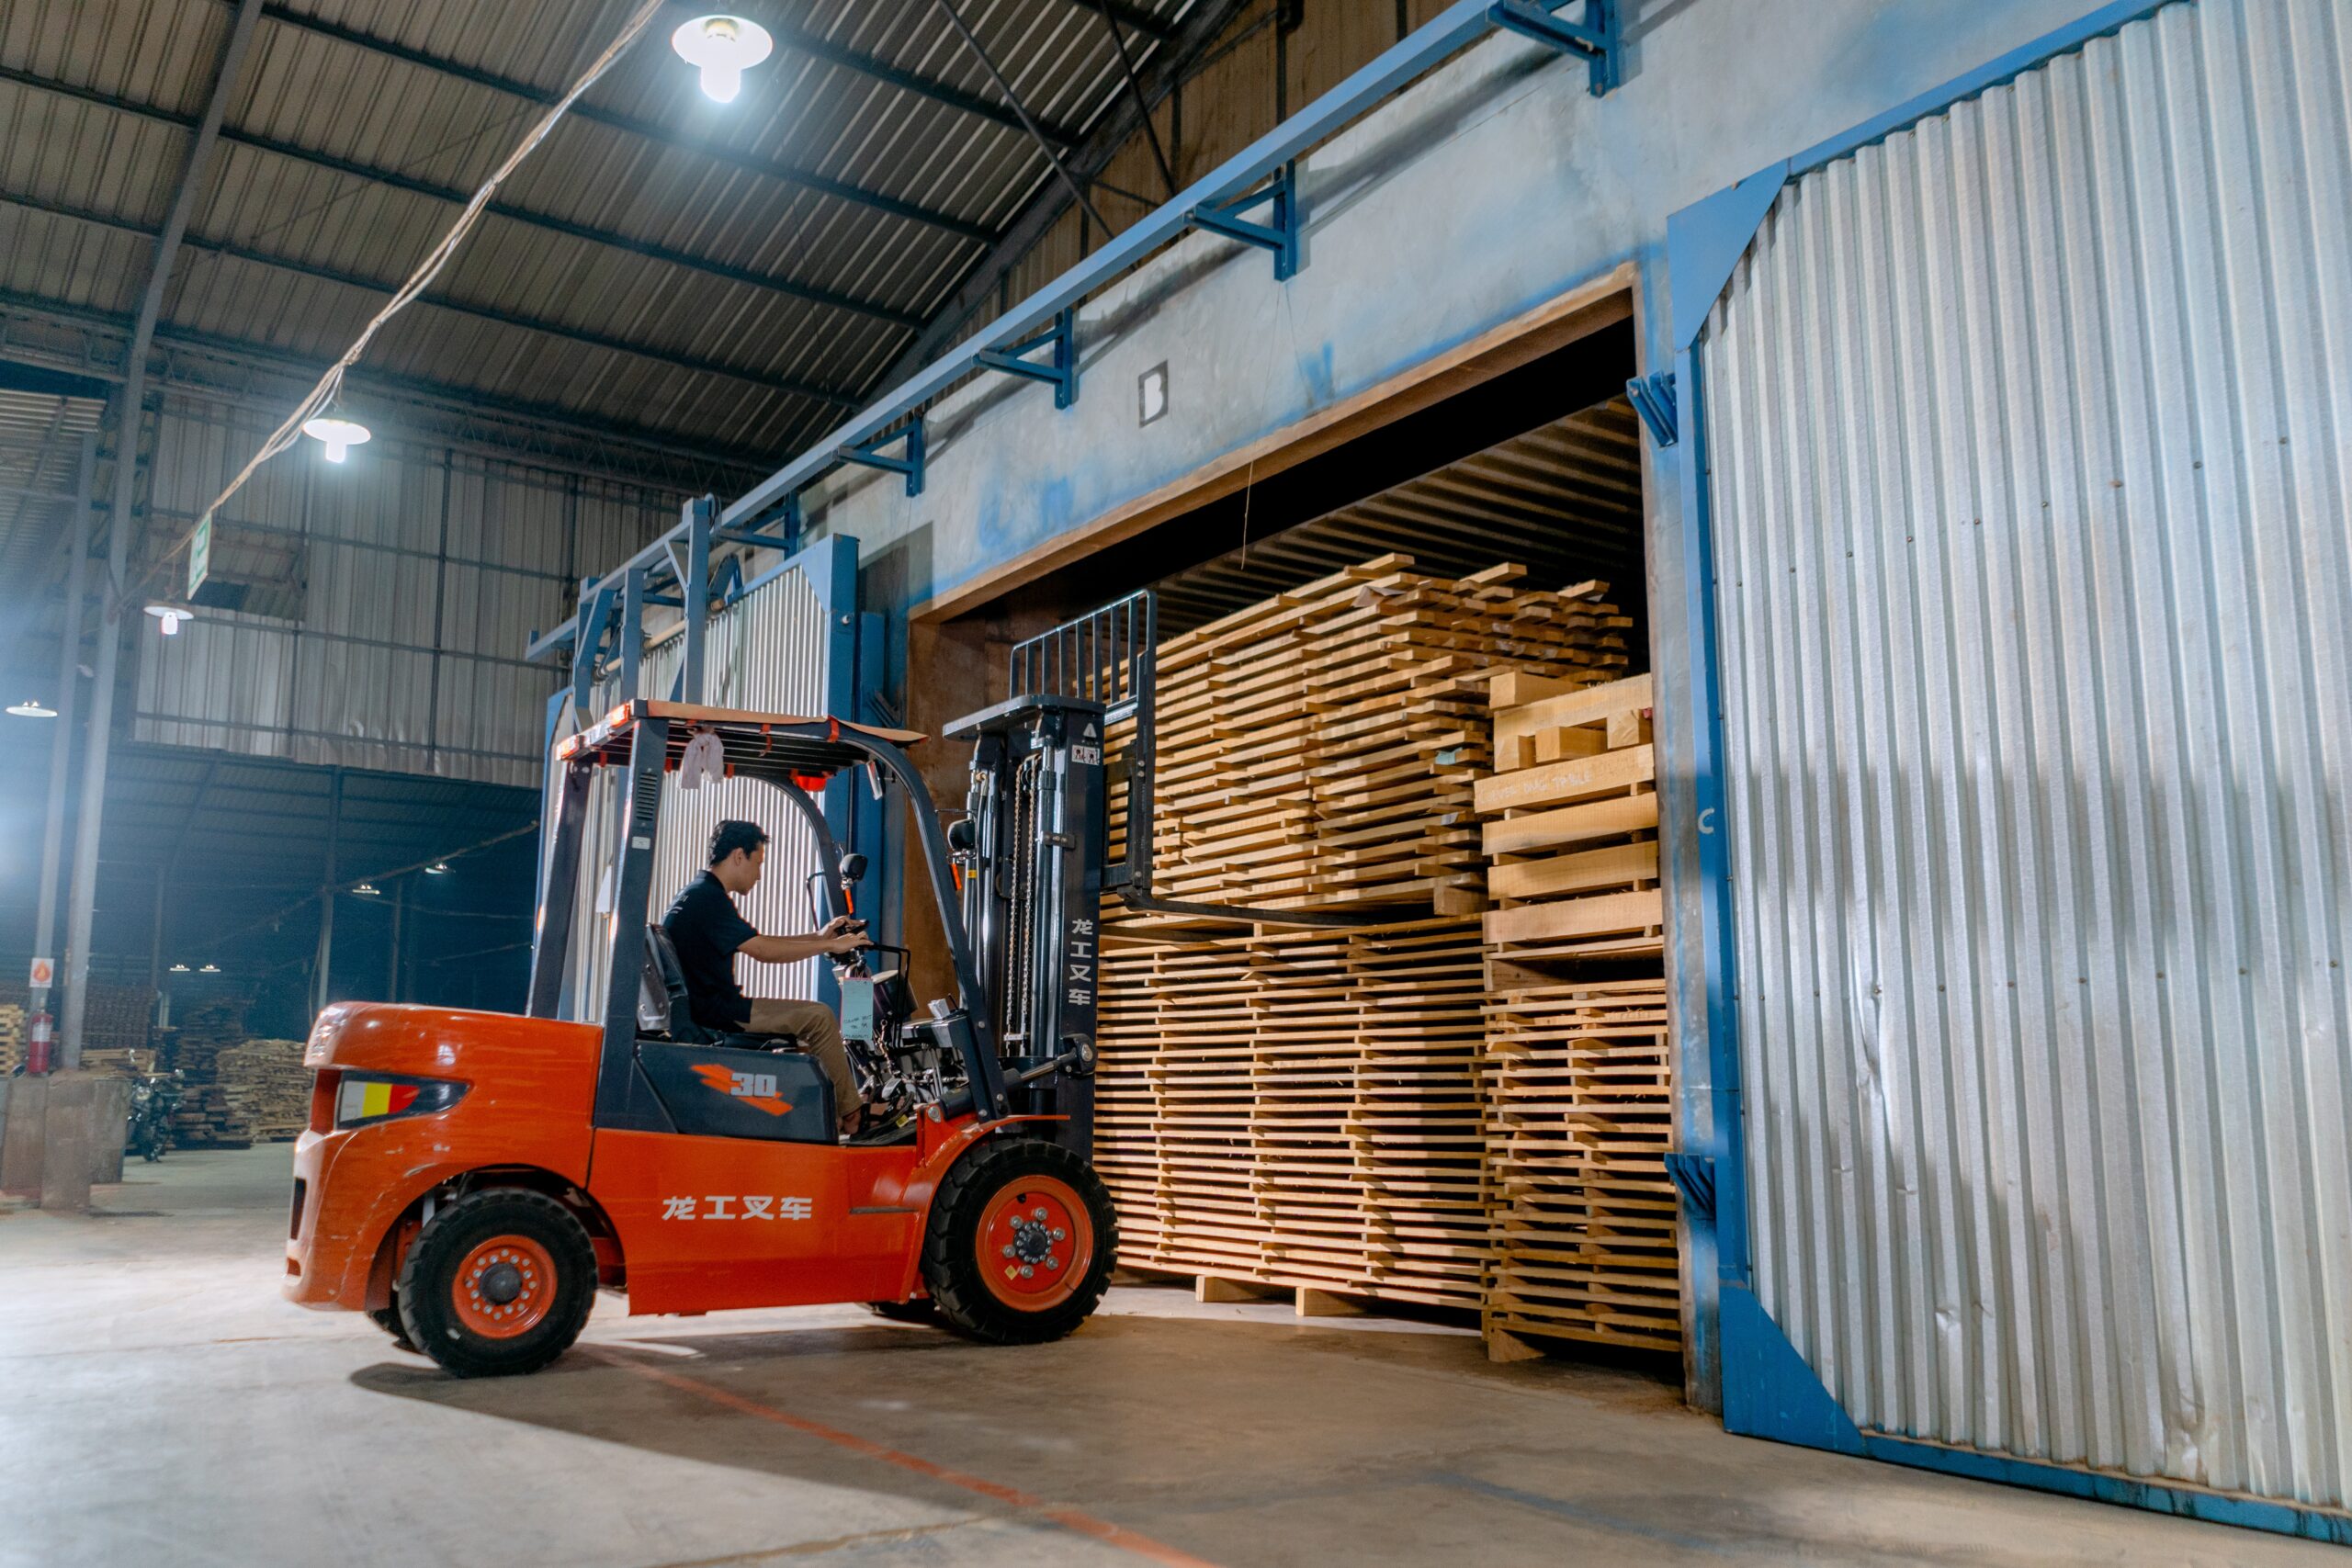 Essential Best Practices to Keep Your Forklift in Tip-Top Shape